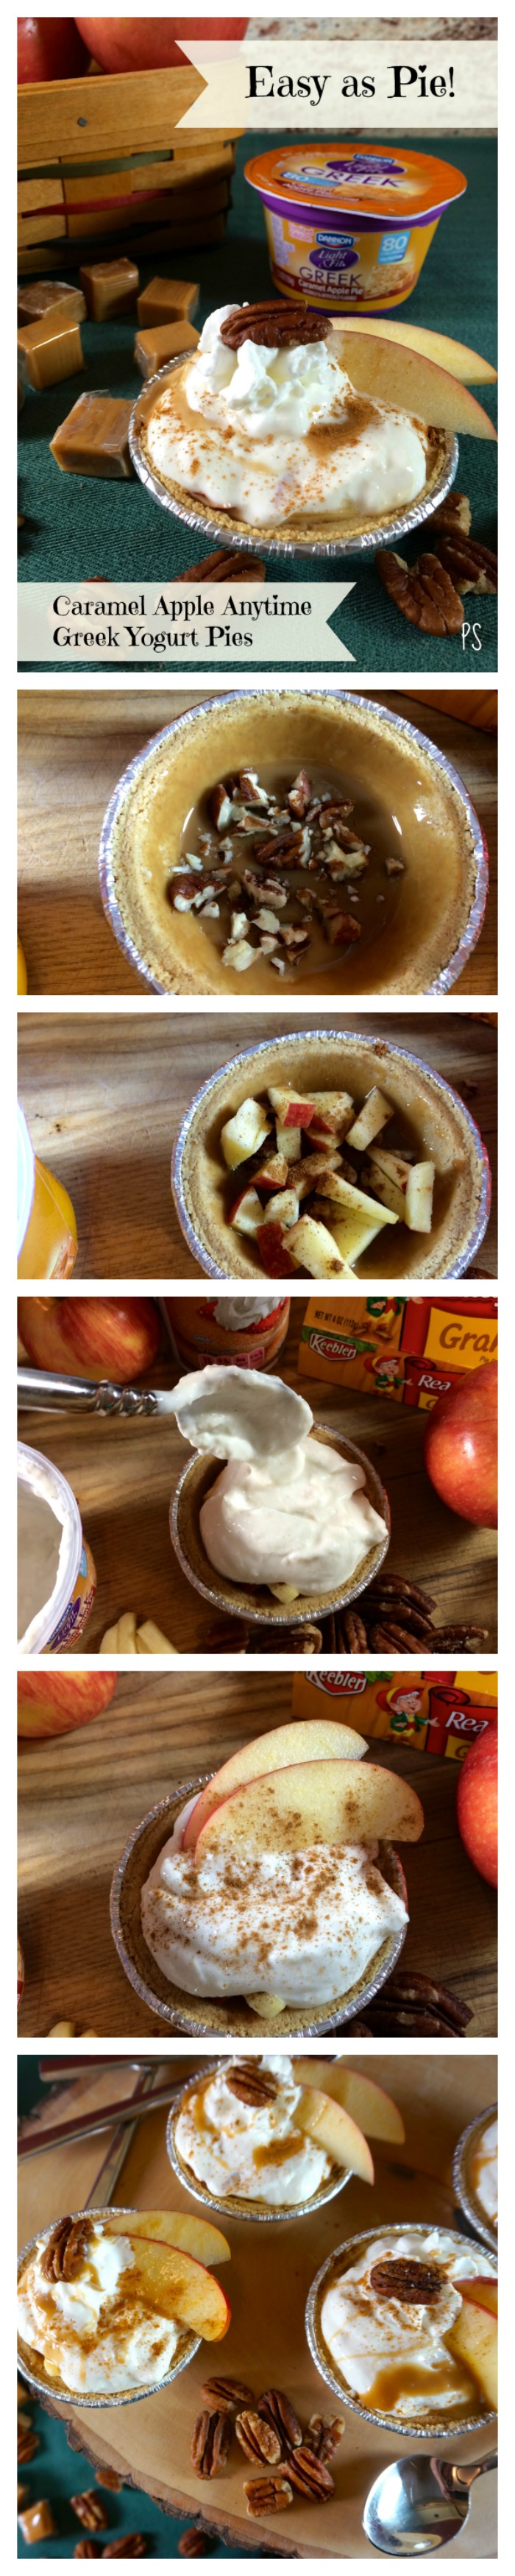 Caramel Apple Anytime Greek Yogurt Pies #EffortlessPies - So fast, easy, delicious, and a healthier choice for dessert! 